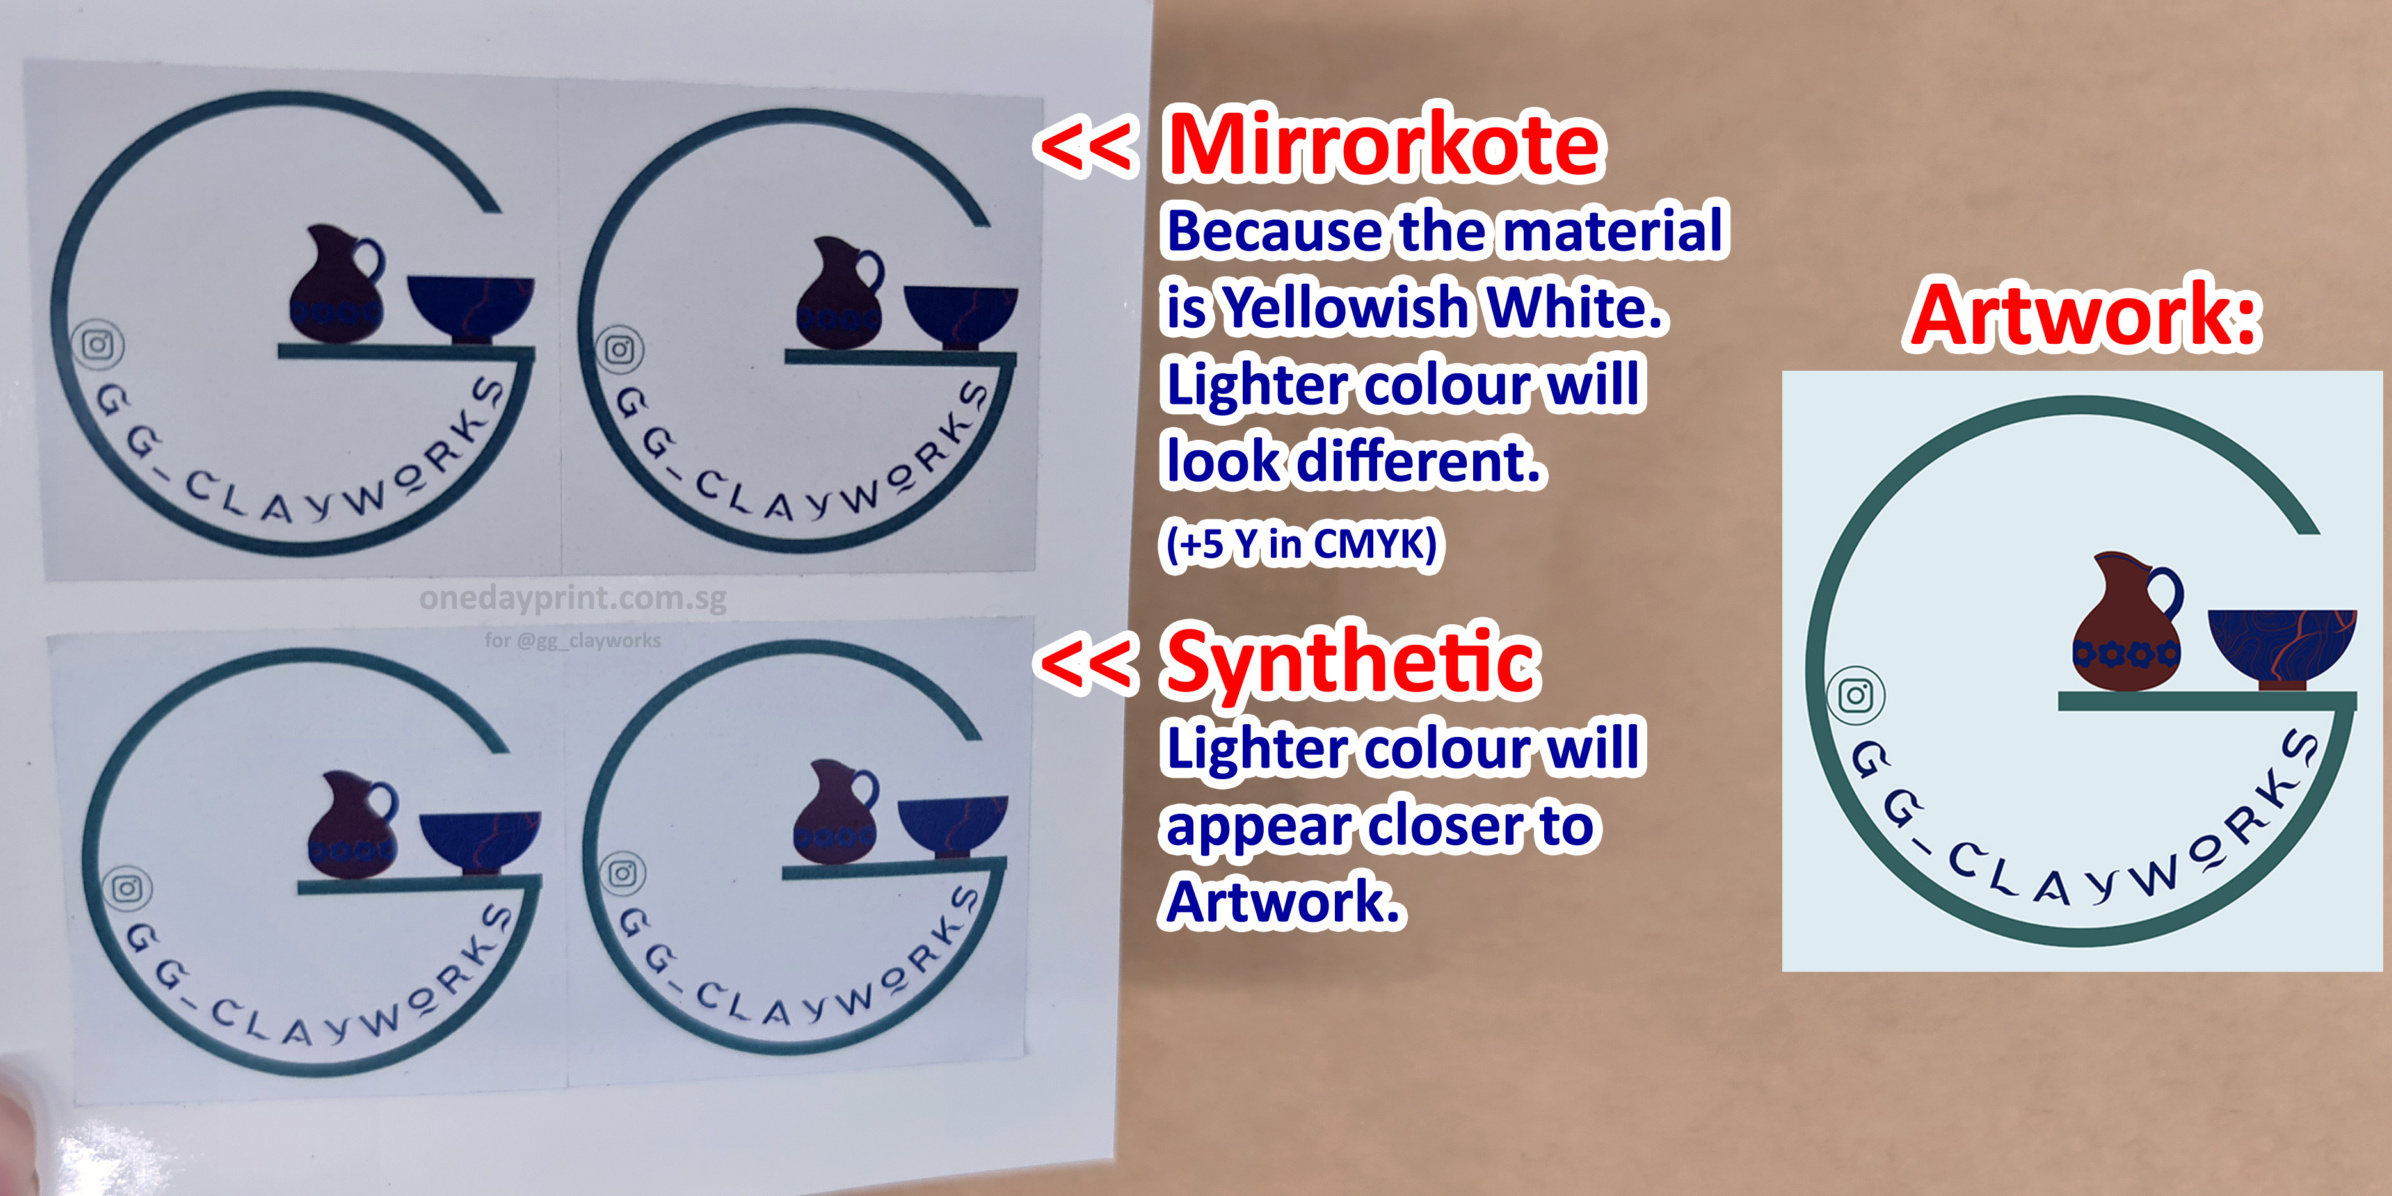 Mirrorkote stickers, lighter colour will look different.